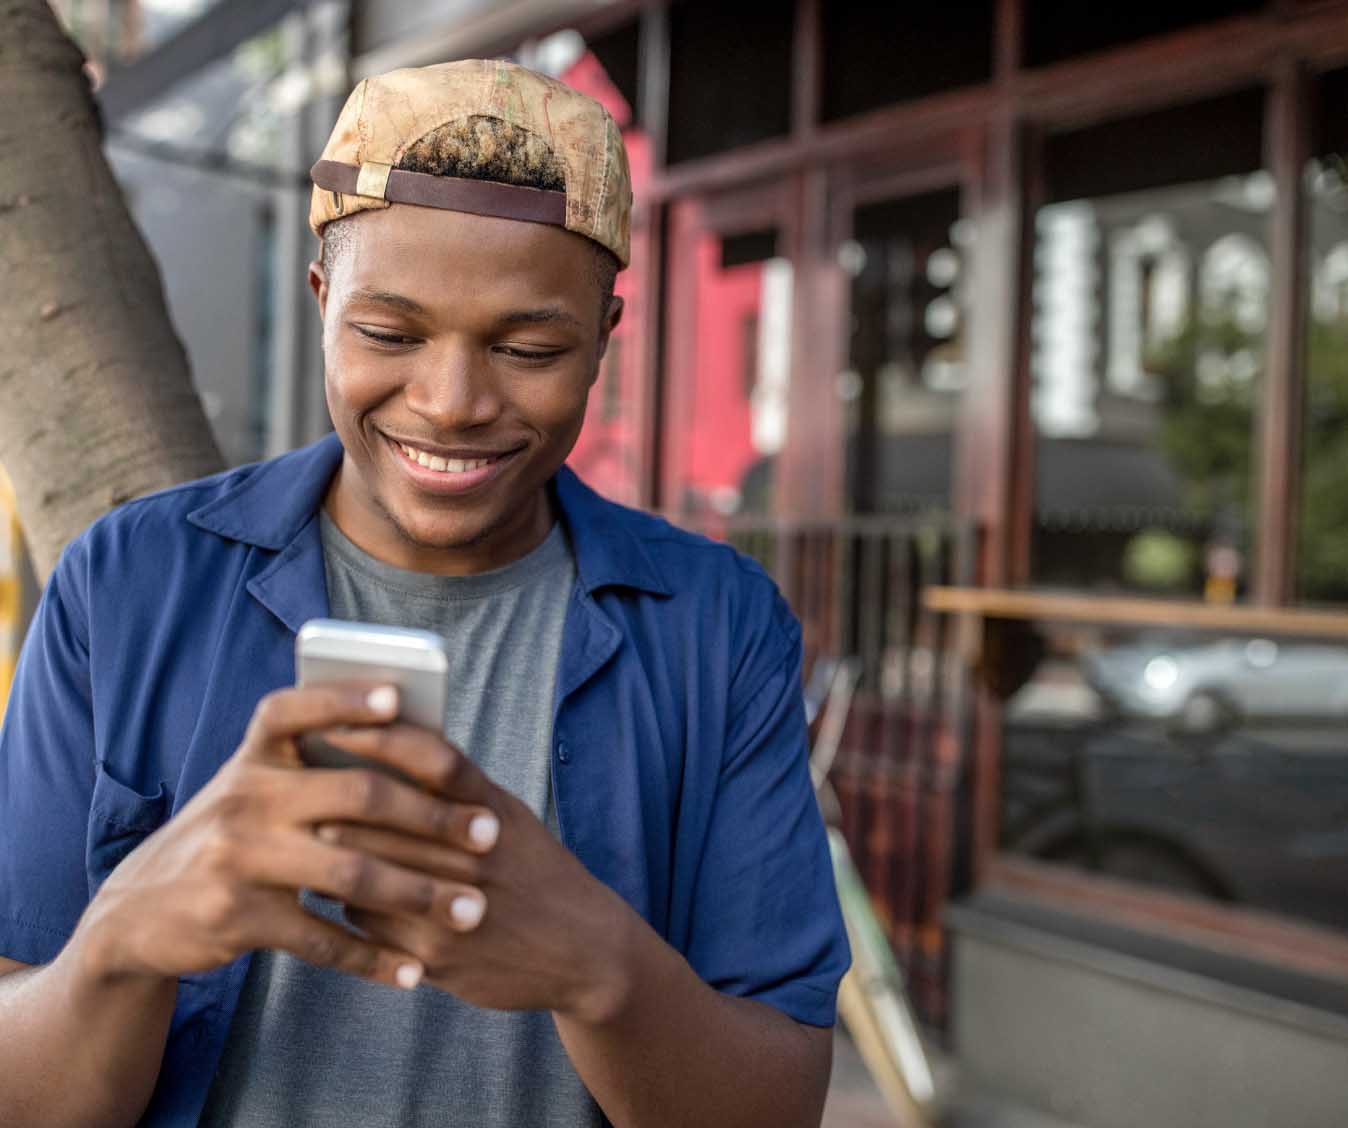 Man smiles while reading cell phone